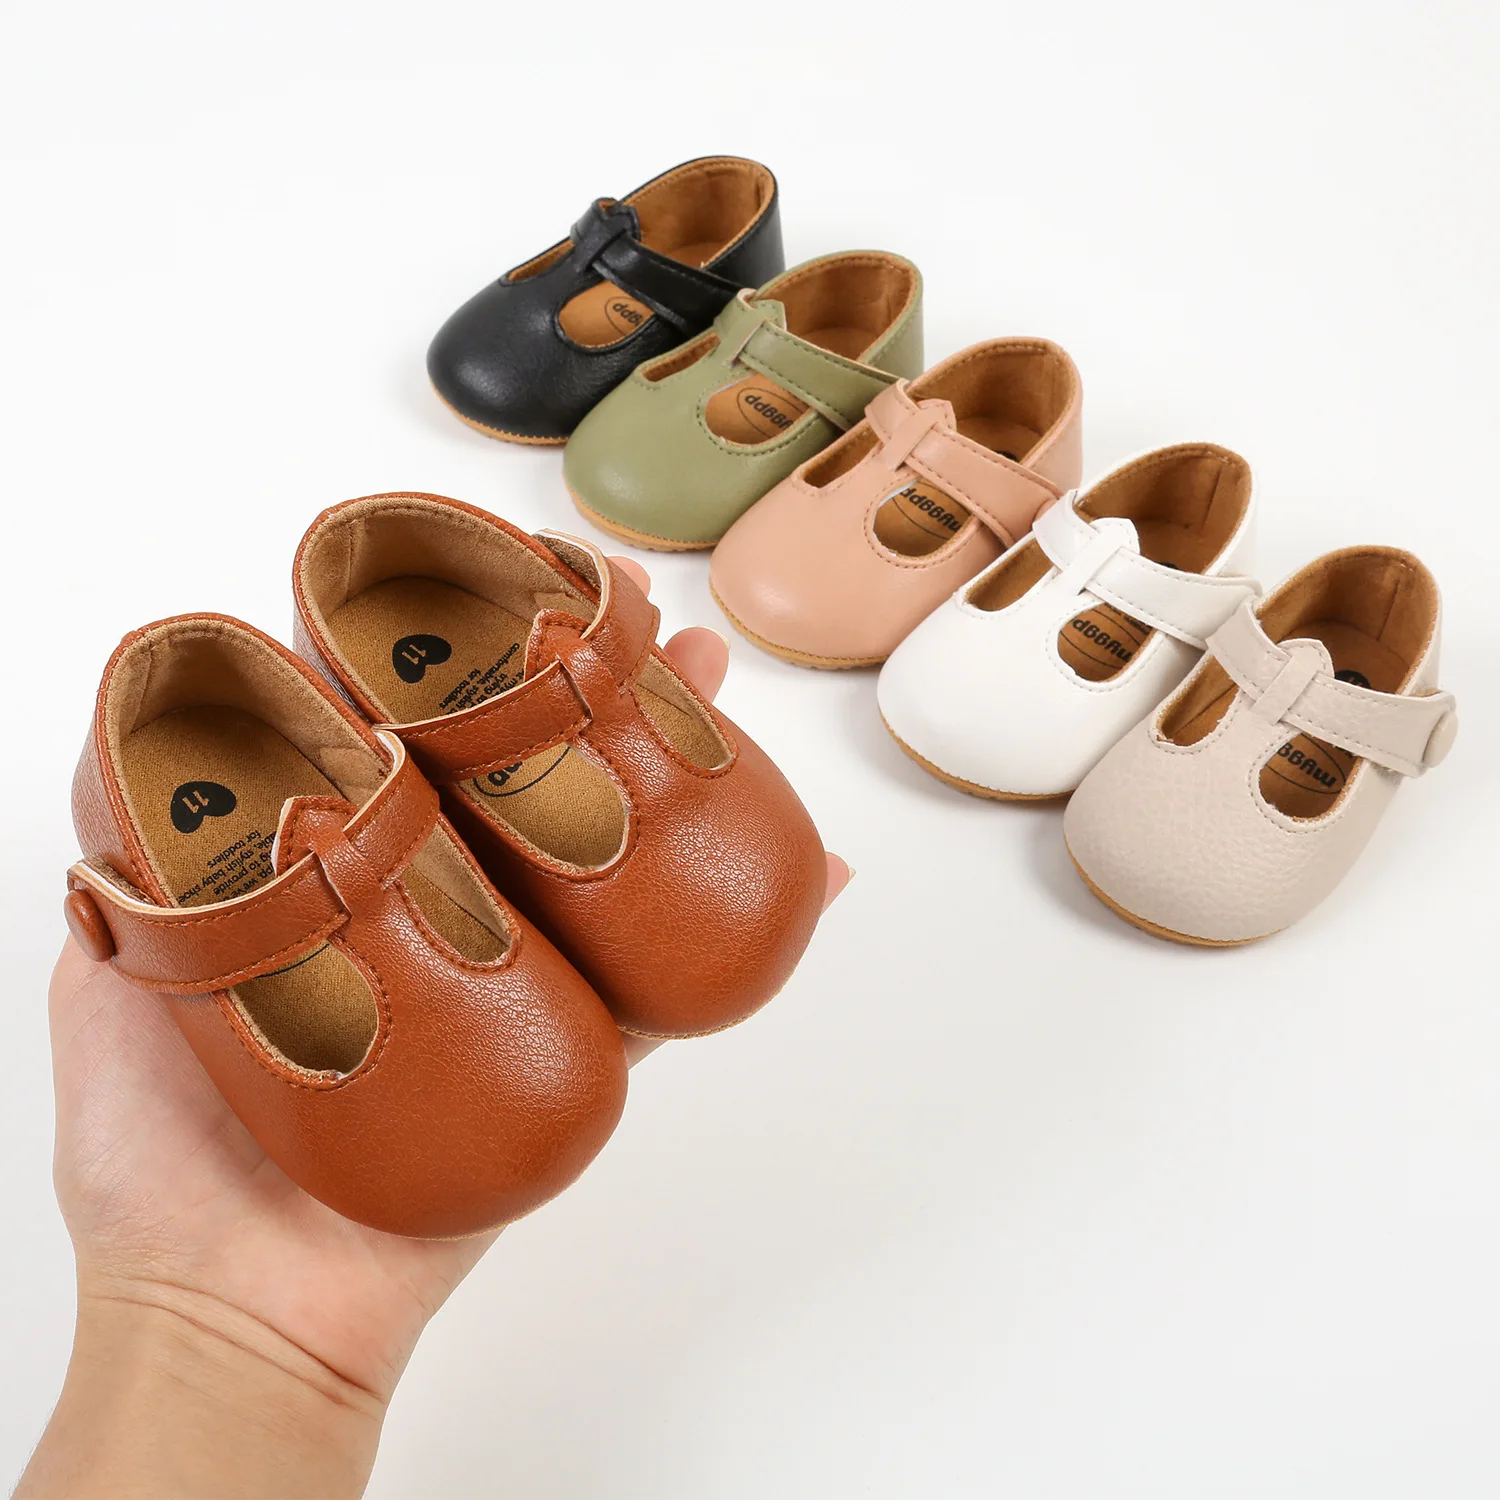 

Vintage Baby Shoes Infant Toddler Anti-slip First Walkers Classical Rubber Soft-Sole Flat PU First Walker Newborn Moccasins